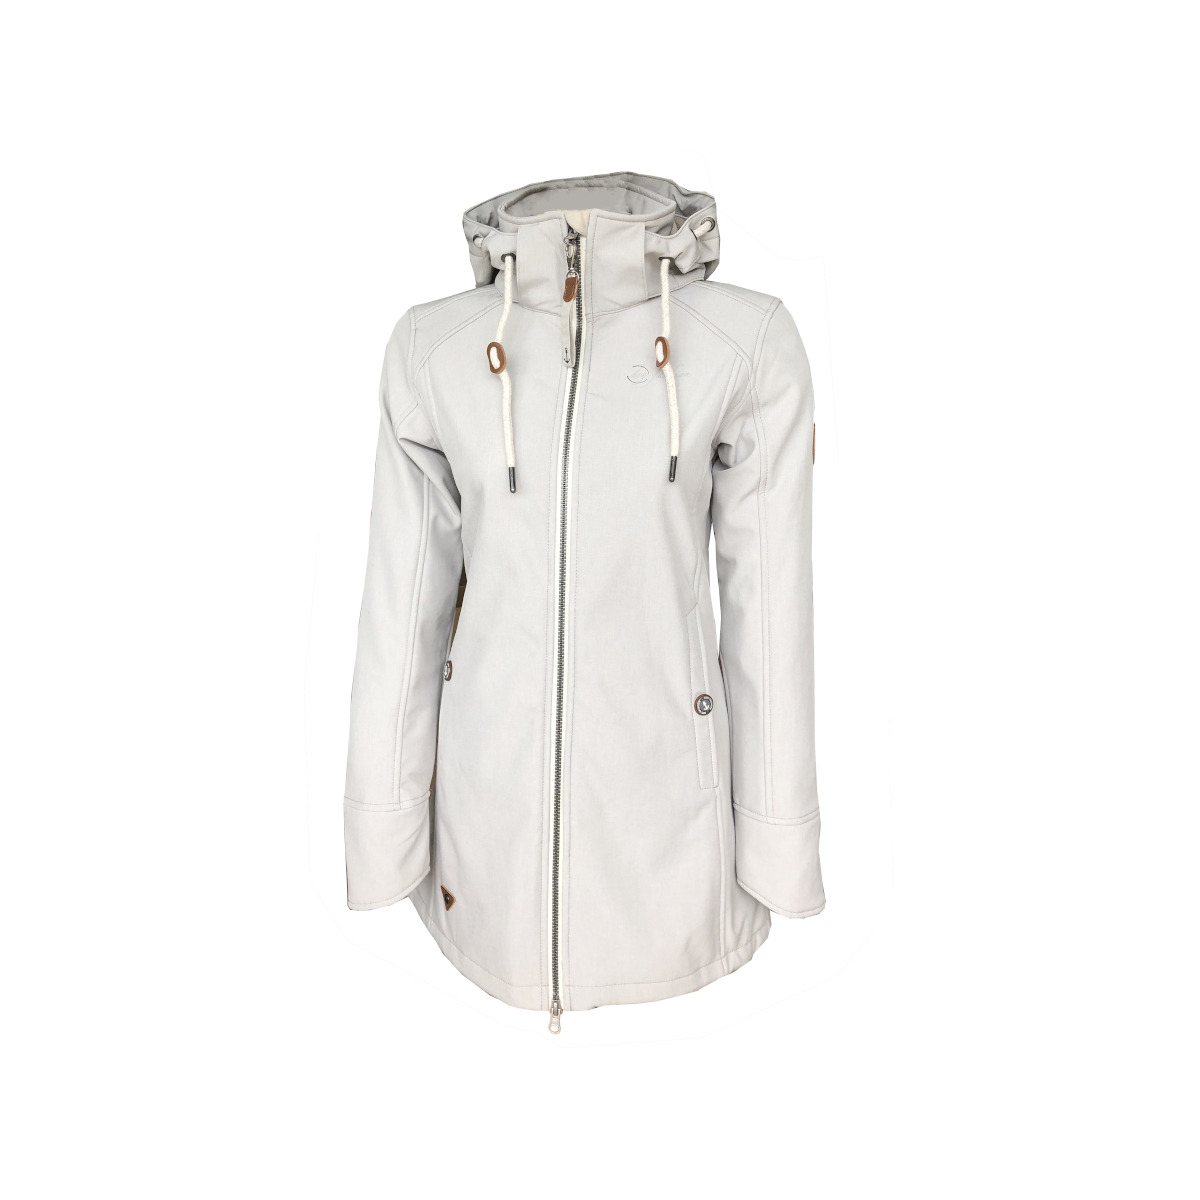 Dry Fashion Sellin Manteau Softshell femme gris clair chiné, taille 42